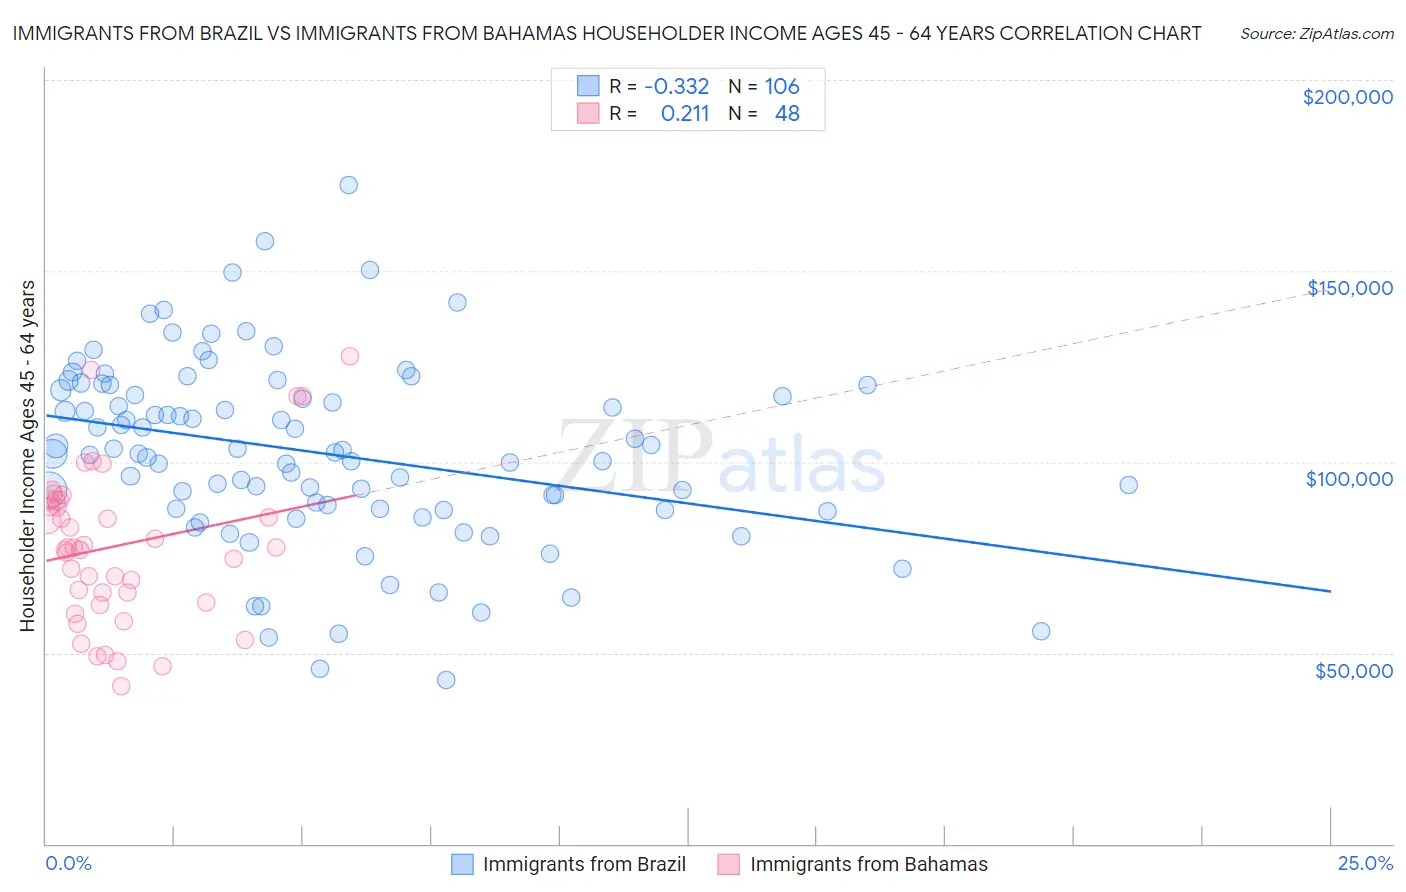 Immigrants from Brazil vs Immigrants from Bahamas Householder Income Ages 45 - 64 years